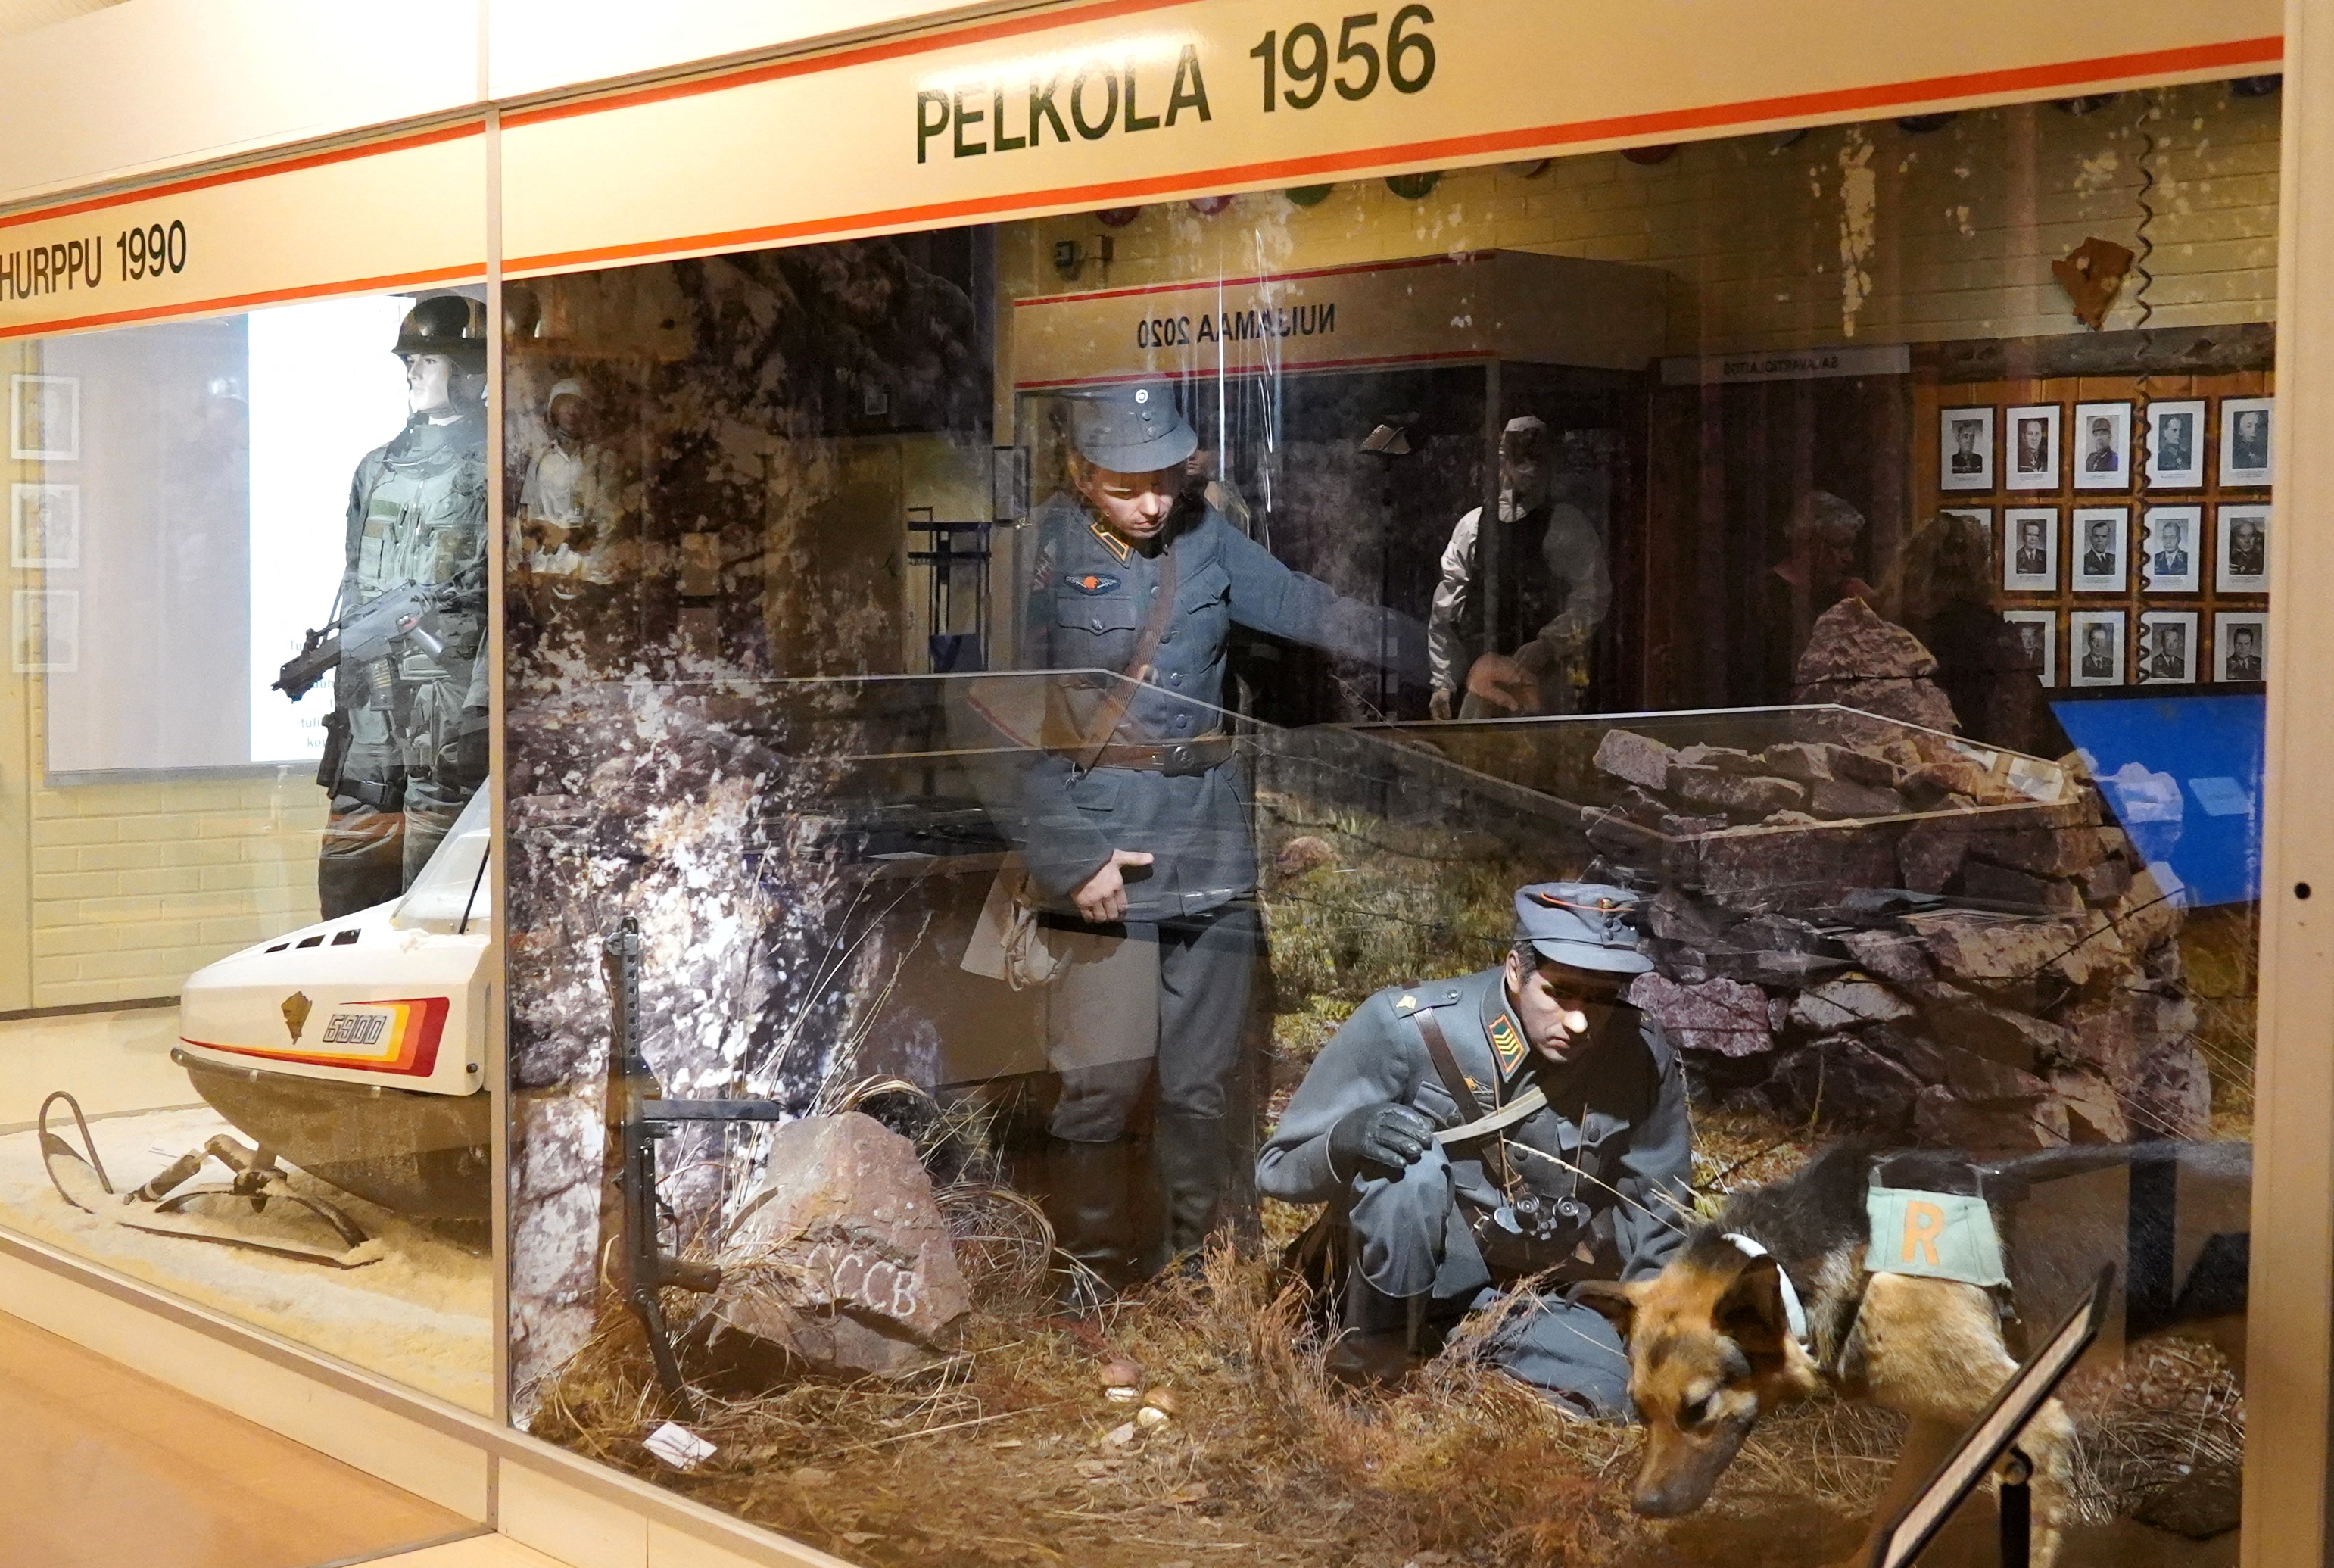 An exhibit in the window depicts Finnish border guards of year 1956 in a Border Museum in Imatra